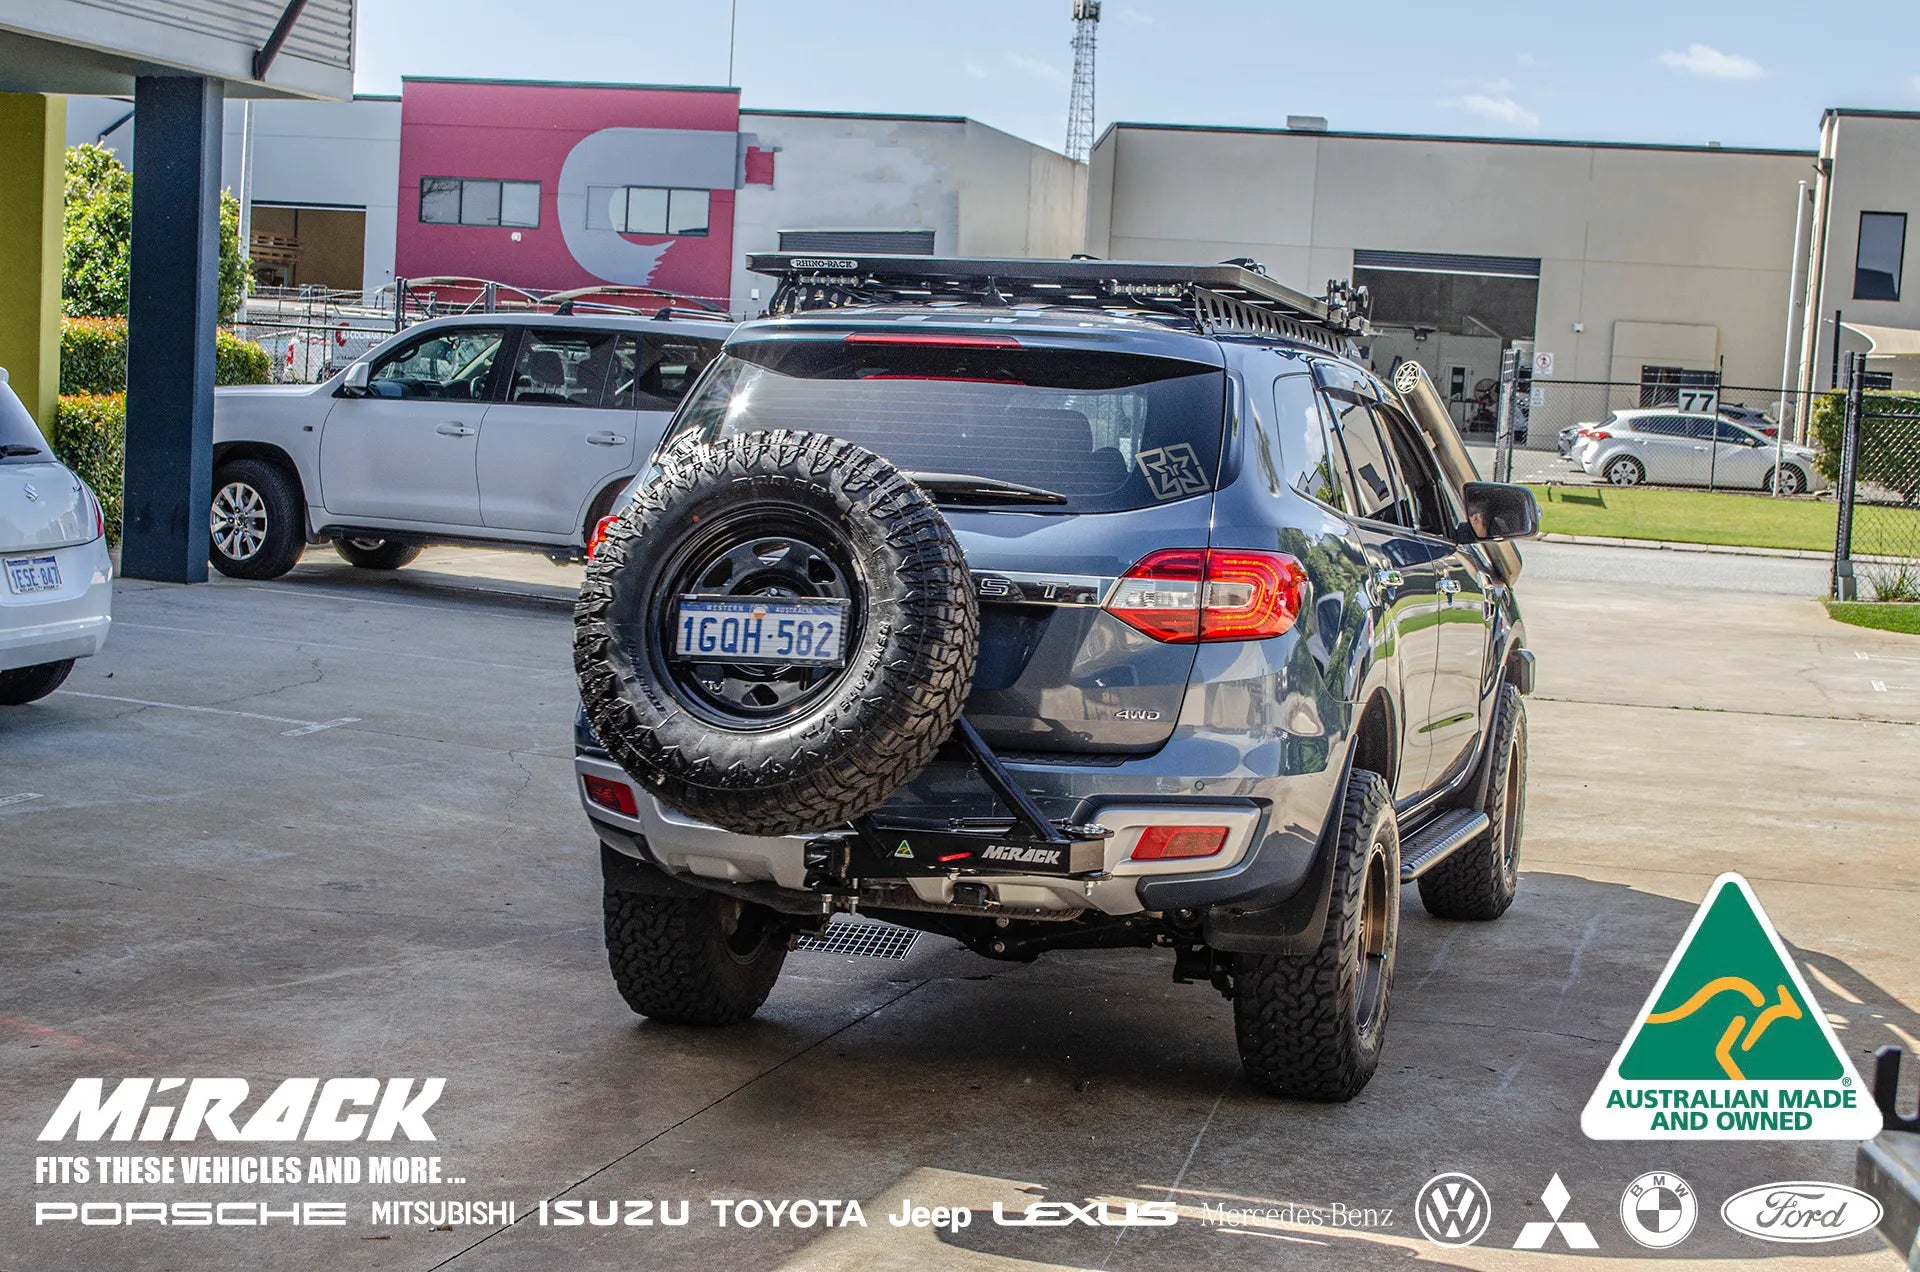 Enhance your Ford Everest's off-road capabilities with this Mirack tilting spare tyre carrier, mounted conveniently on the tow hitch.